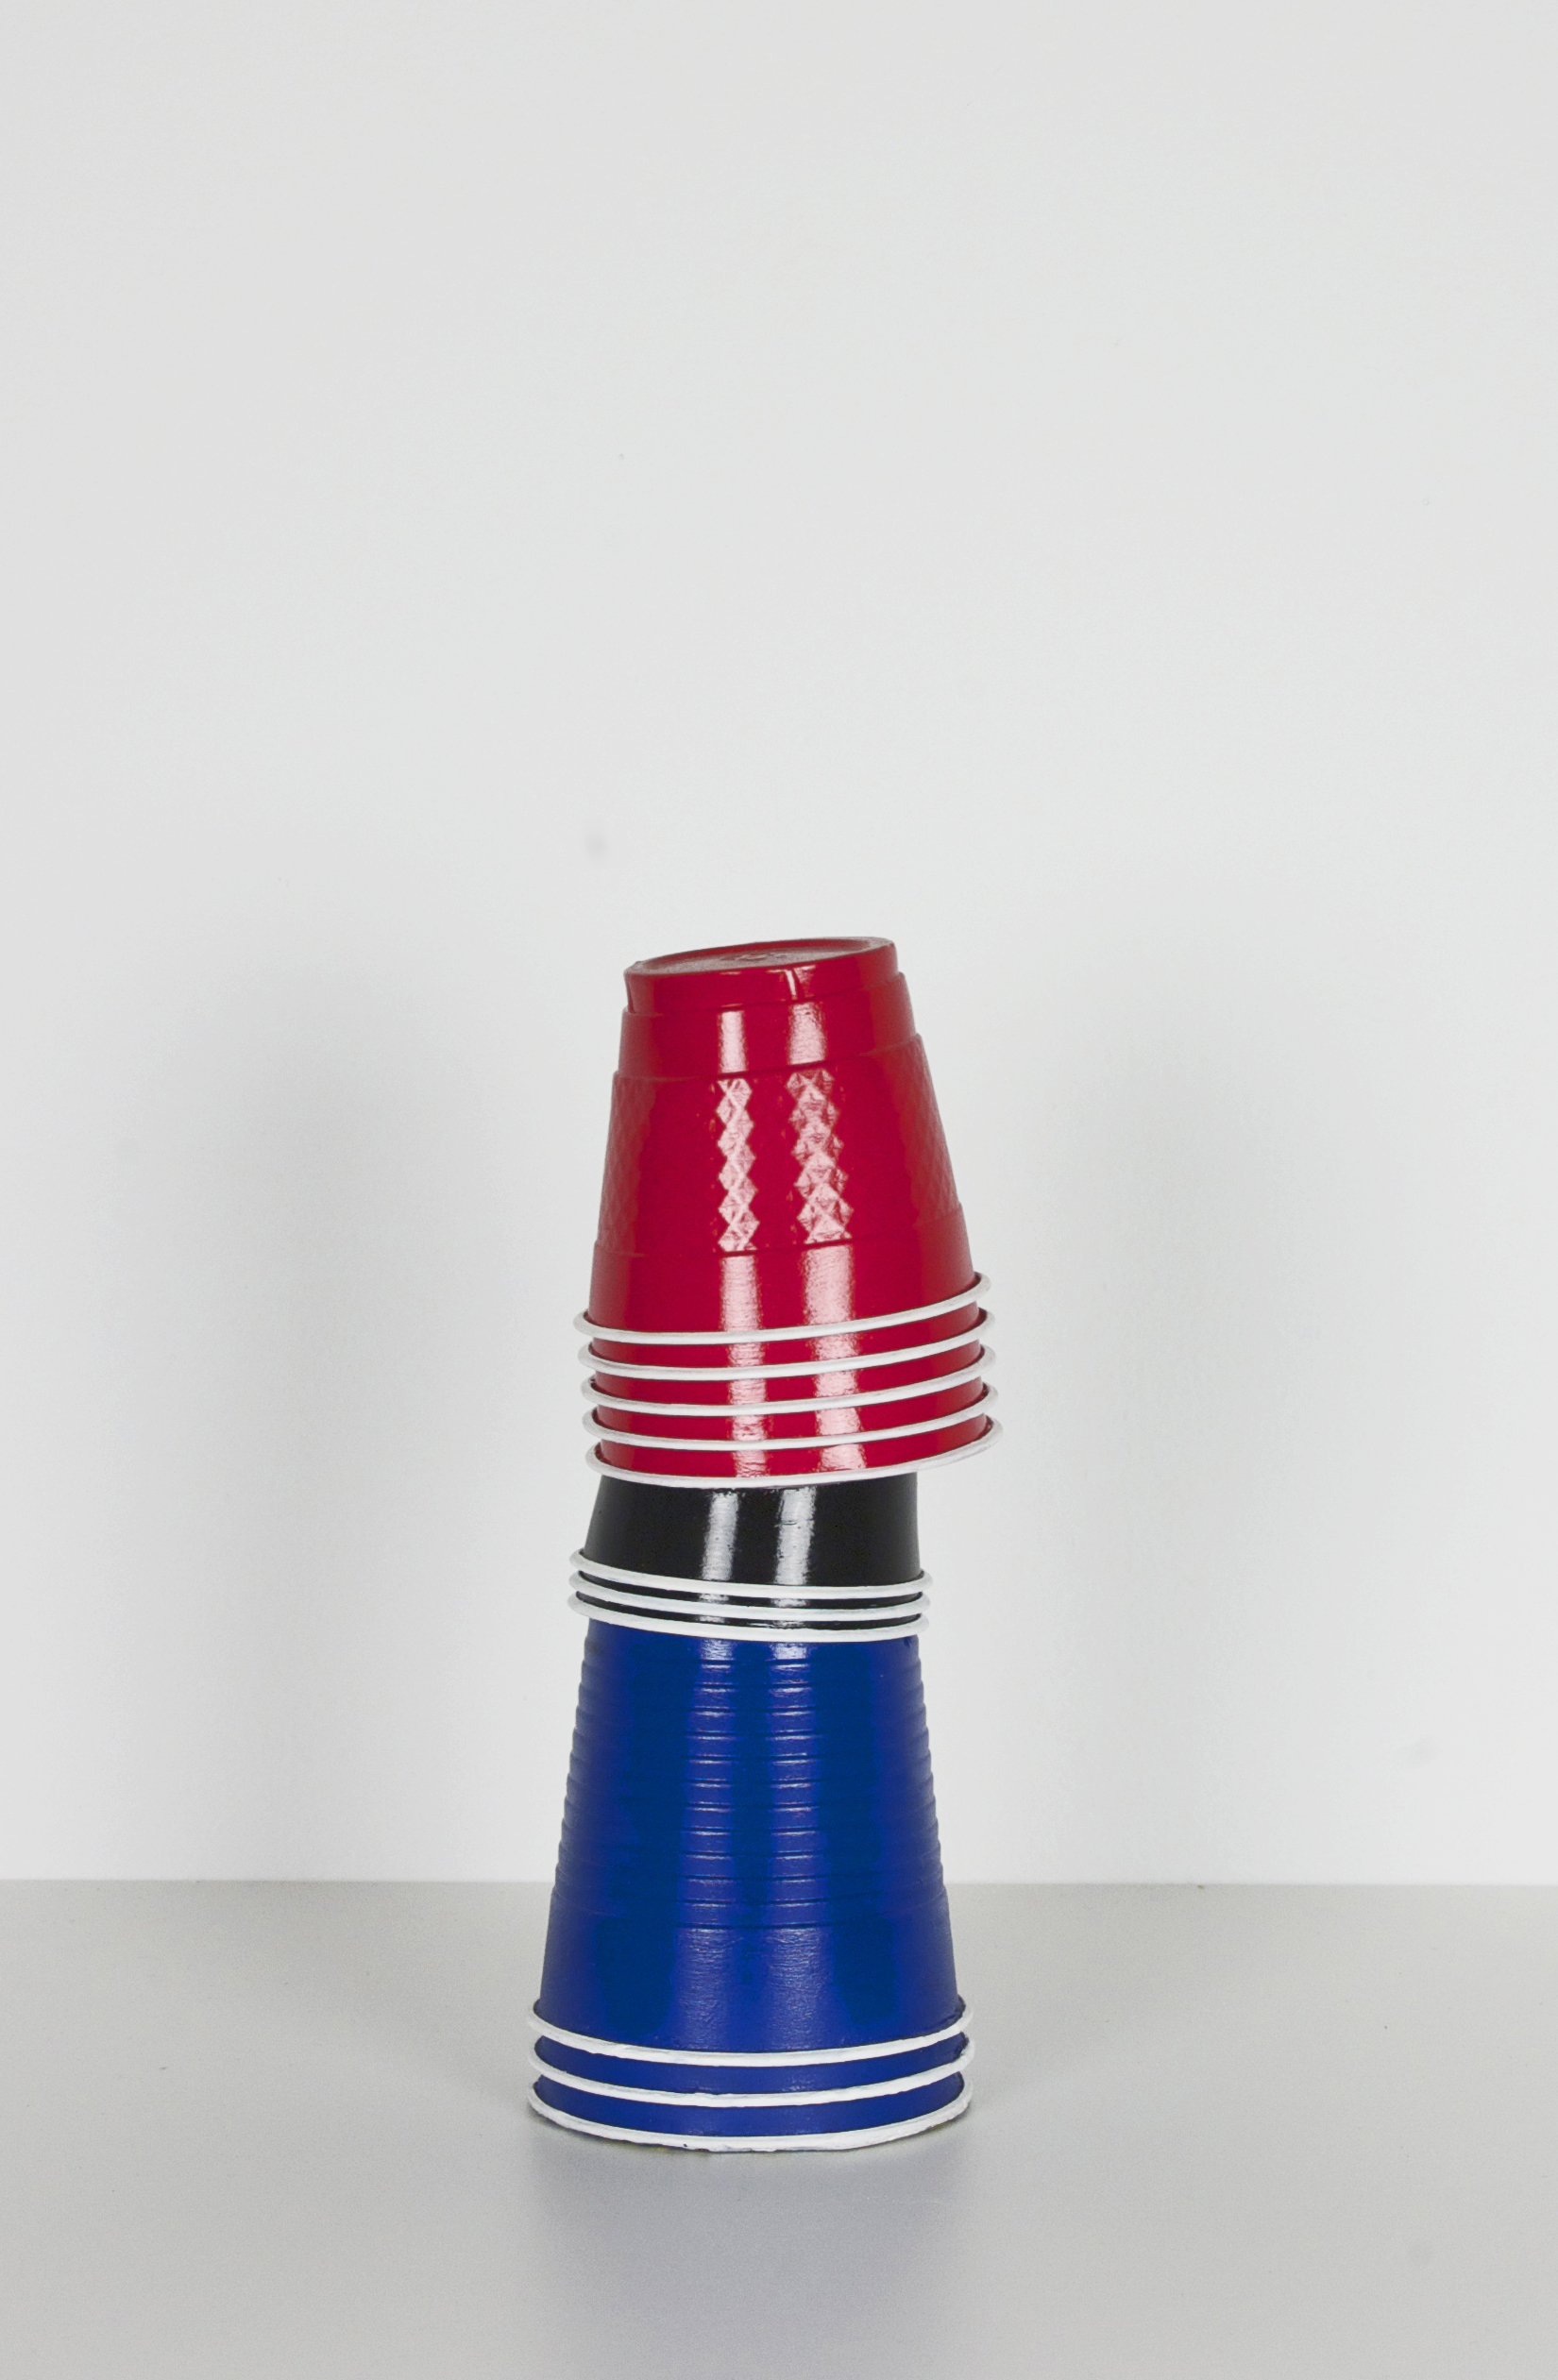 Solo Cup Stack, 2015, Acrylic on cast polyurathane, 10" x 4.5" x 4.5"